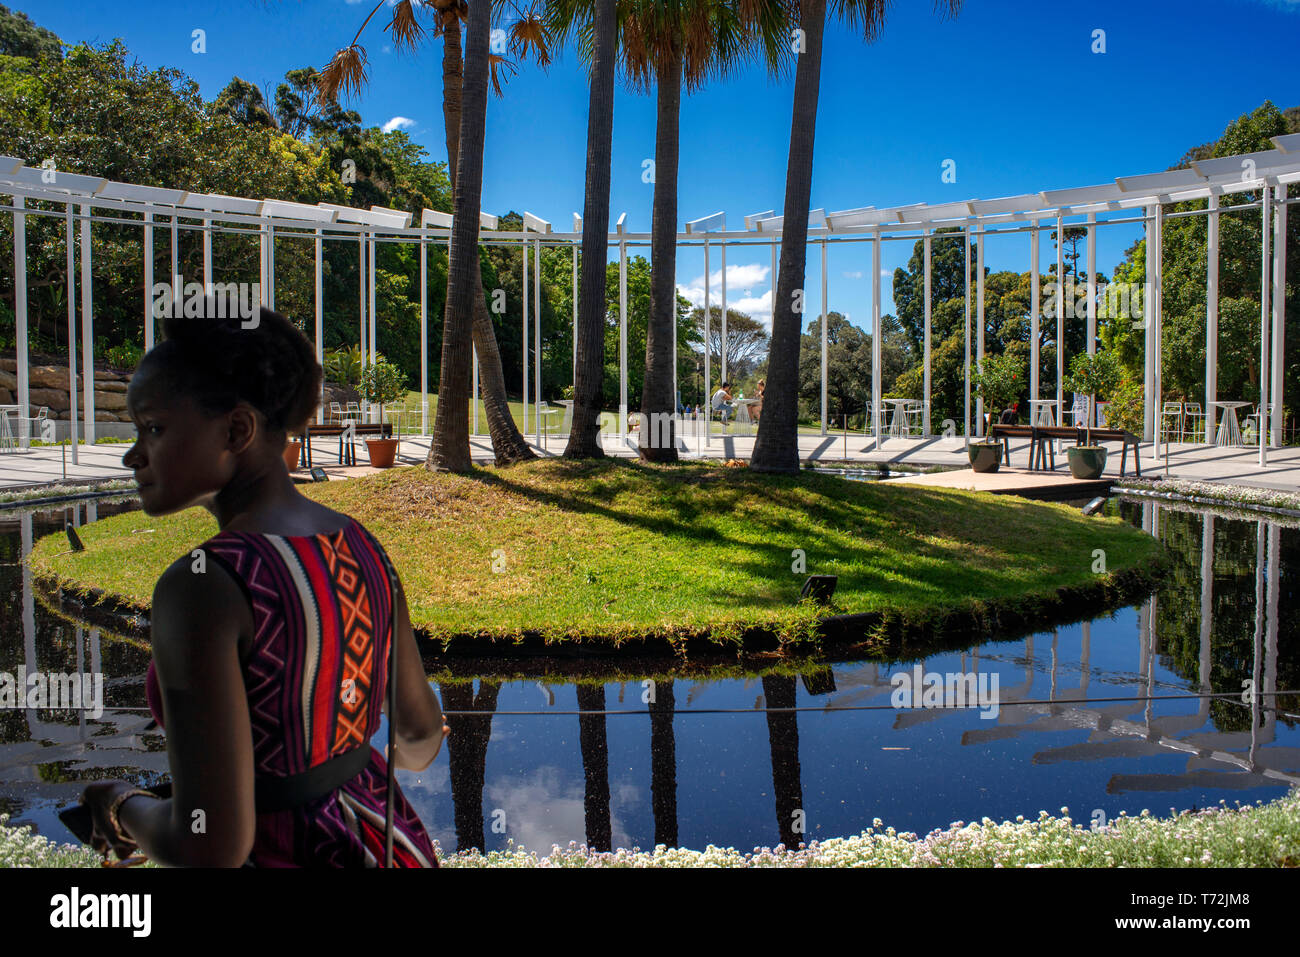 Black woman in The Calyx building at the Royal Botanic Gardens with people relaxing in the gardens in Sydney, Australia Stock Photo